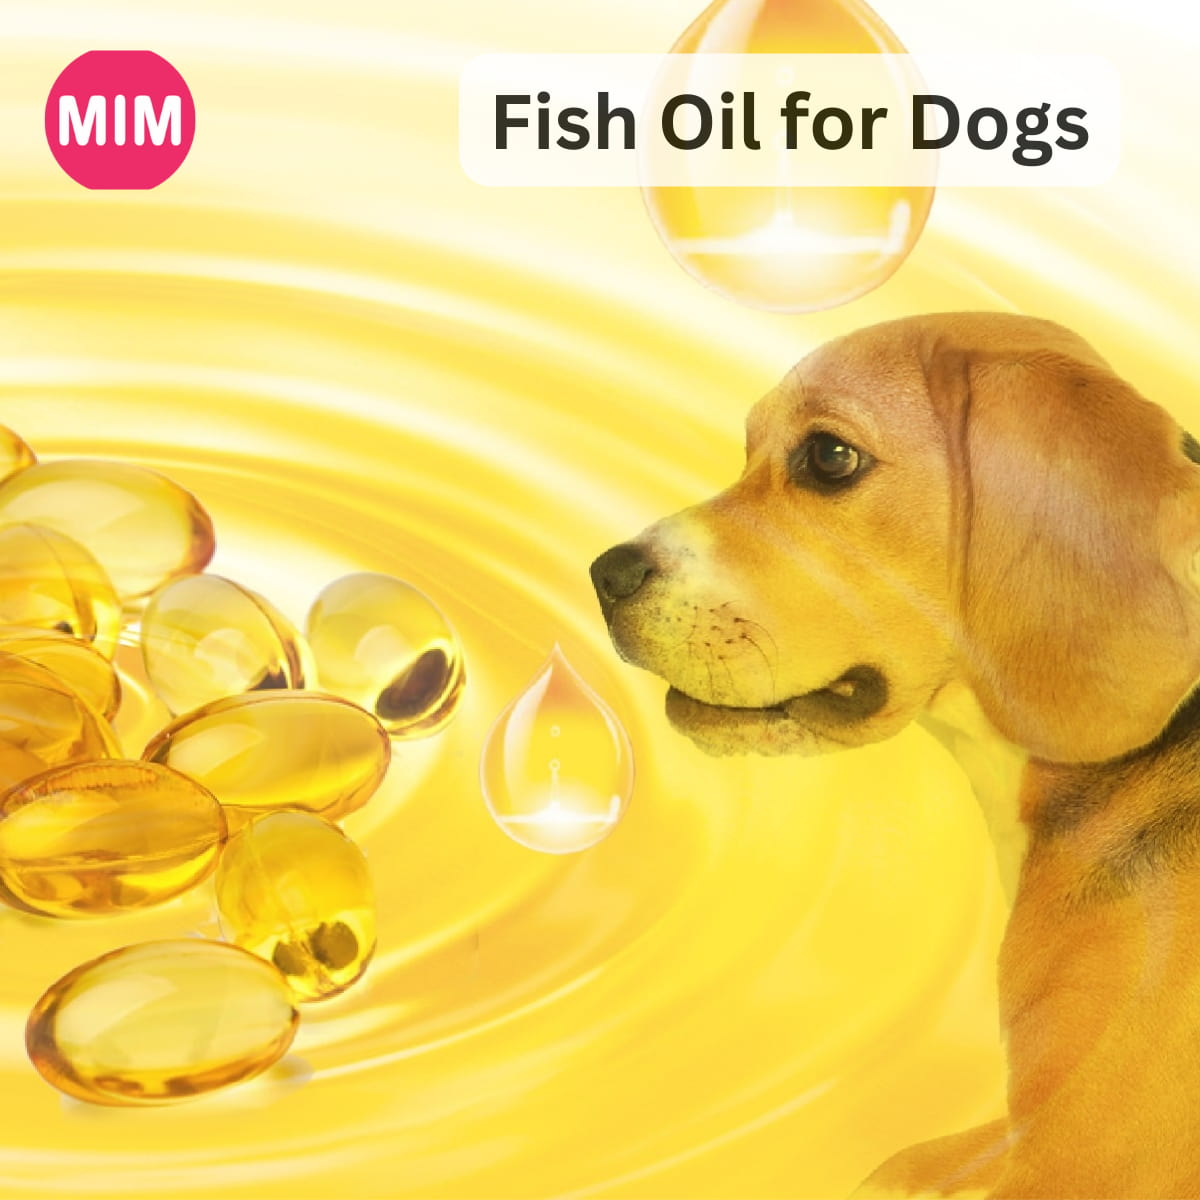 Fish Oil for Dogs, Best fish oil brands for dogs, Best fish oil for dogs, types of Best fish oil, Benefits of fish oil for dogs, Benefits of fish oil